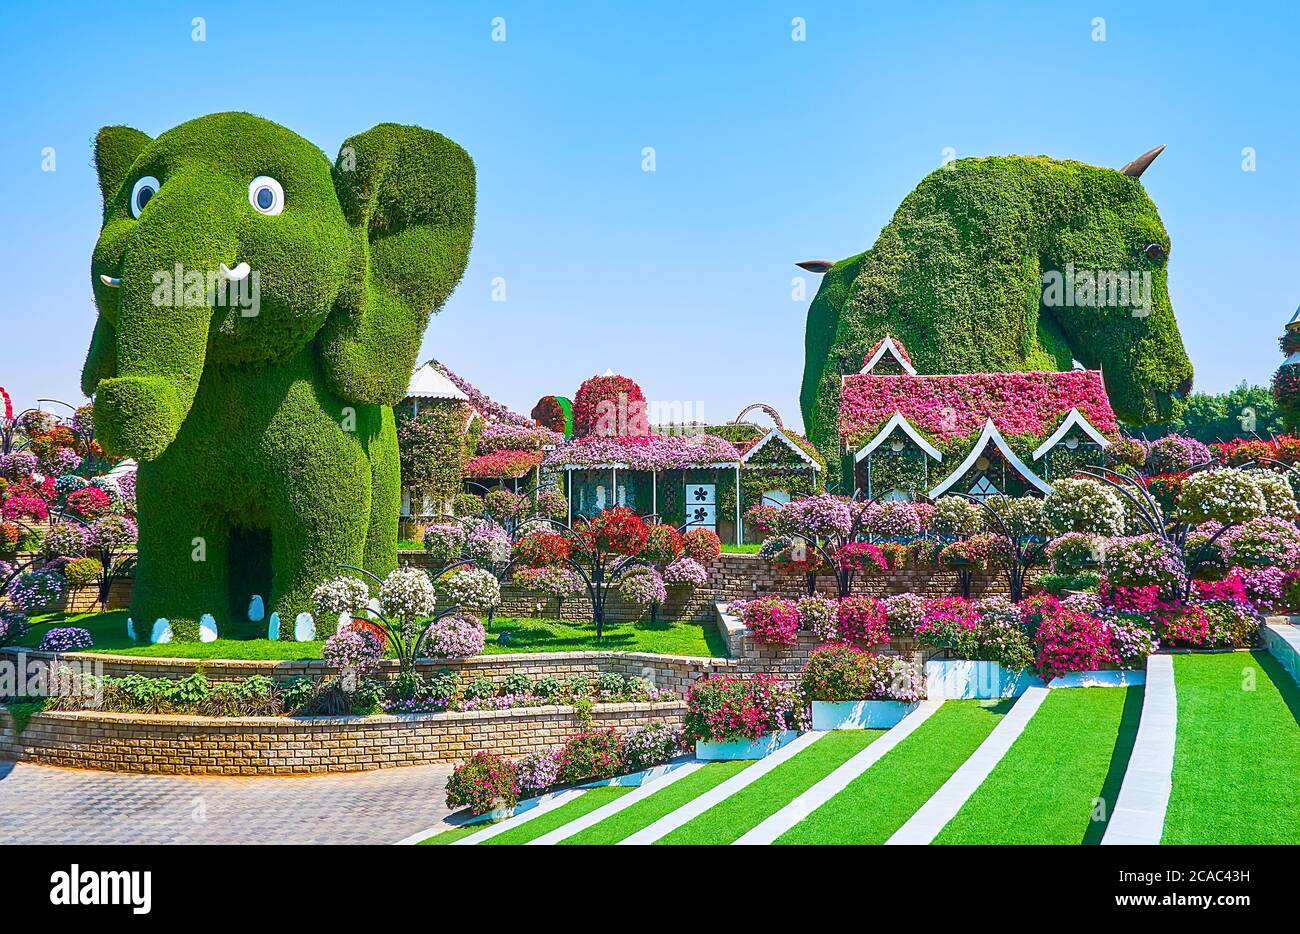 DUBAI, UAE - MARCH 5, 2020: The Miracle Garden has many floral installtions of animals, such elephants or horses, on March 5 in Dubai Stock Photo